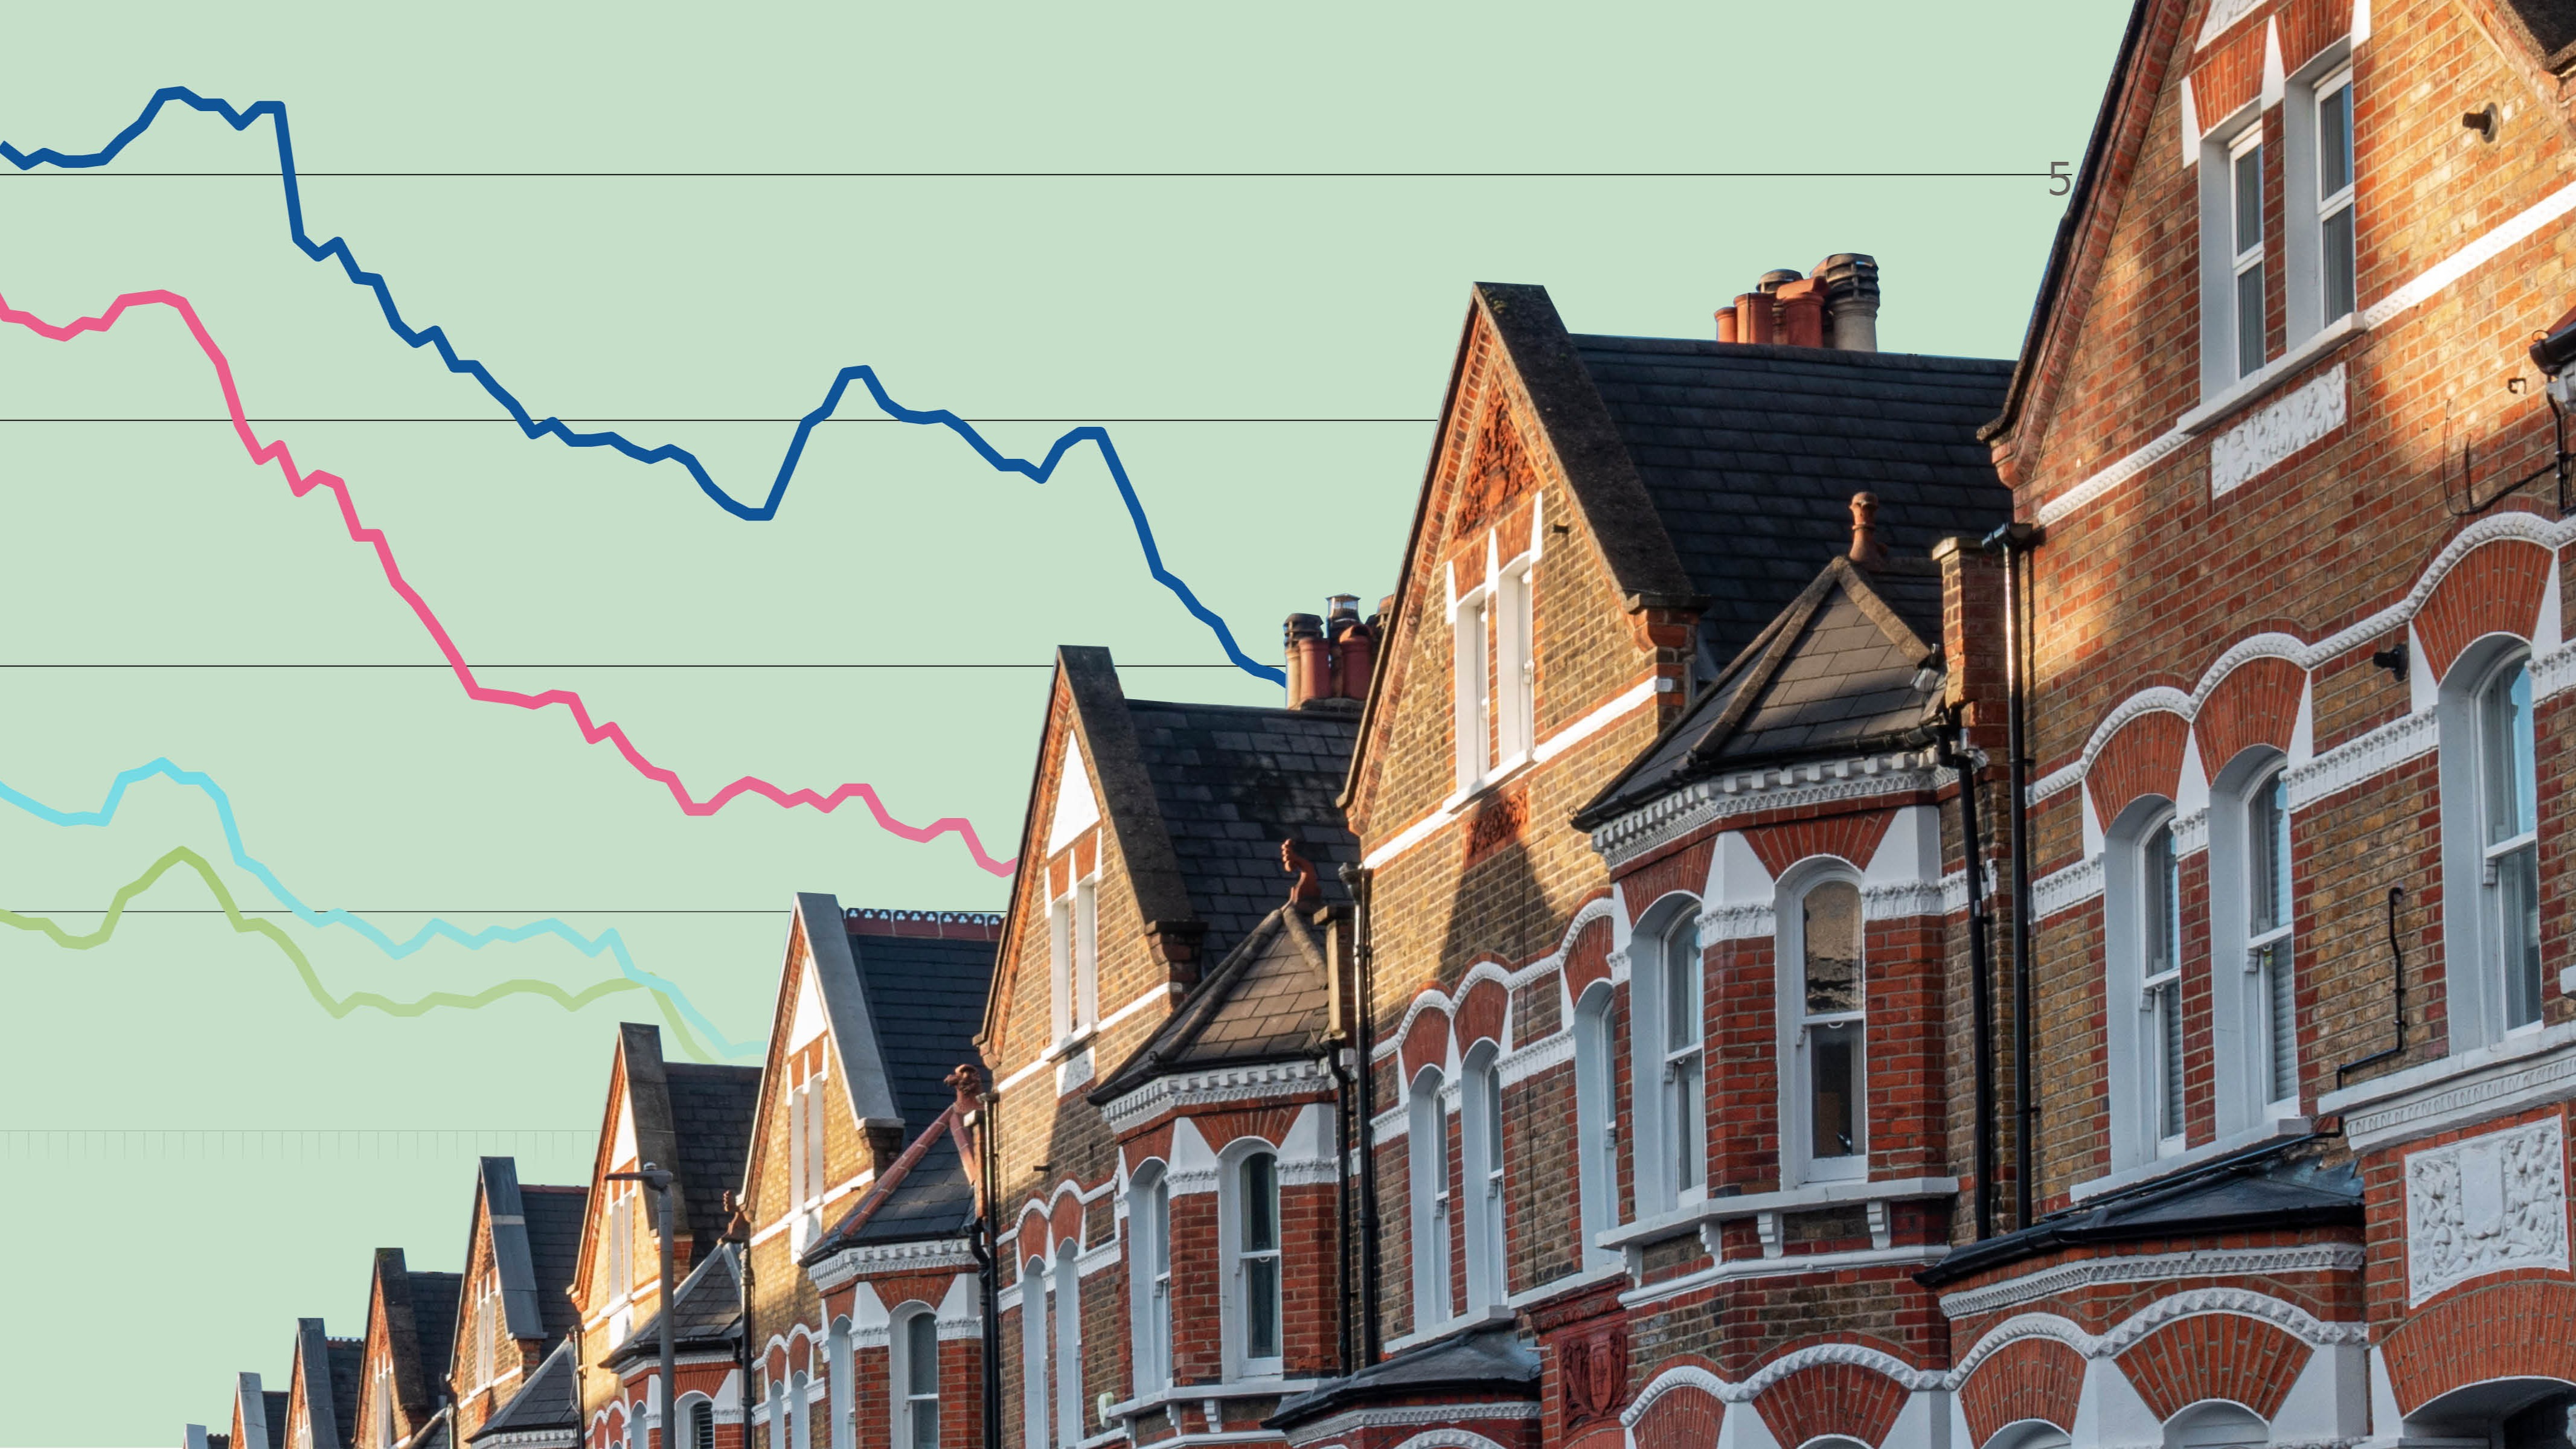 Housing Market in UK Set for ‘Rollercoaster Ride’